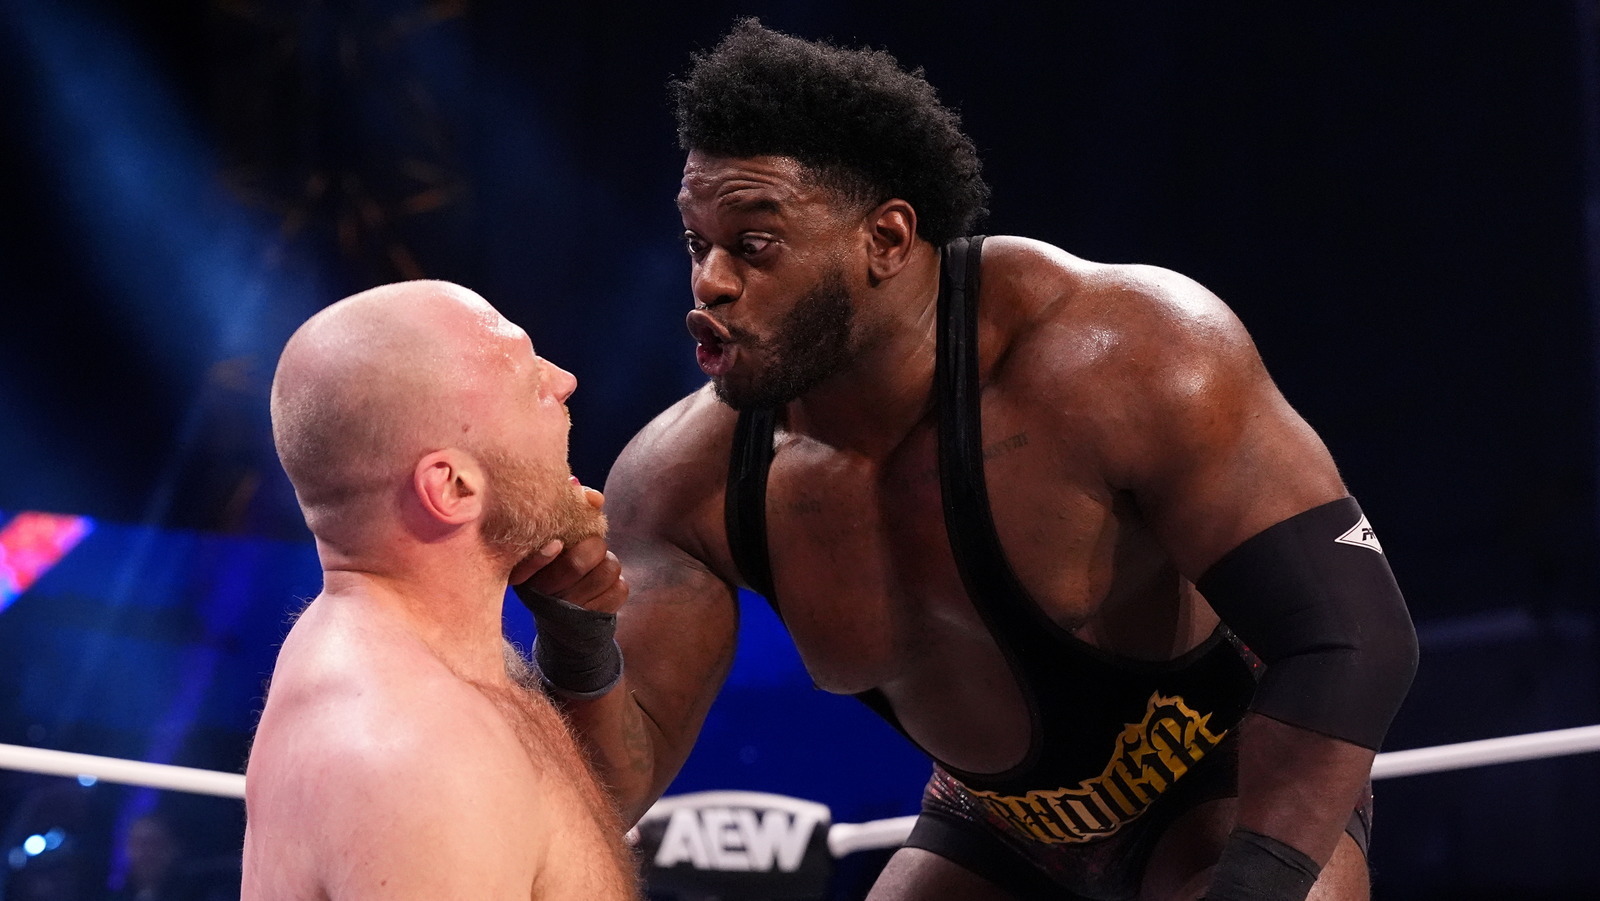 AEW's Powerhouse Hobbs Speaks Out On Injury: 'The Only Choice Is To Come Back Better'